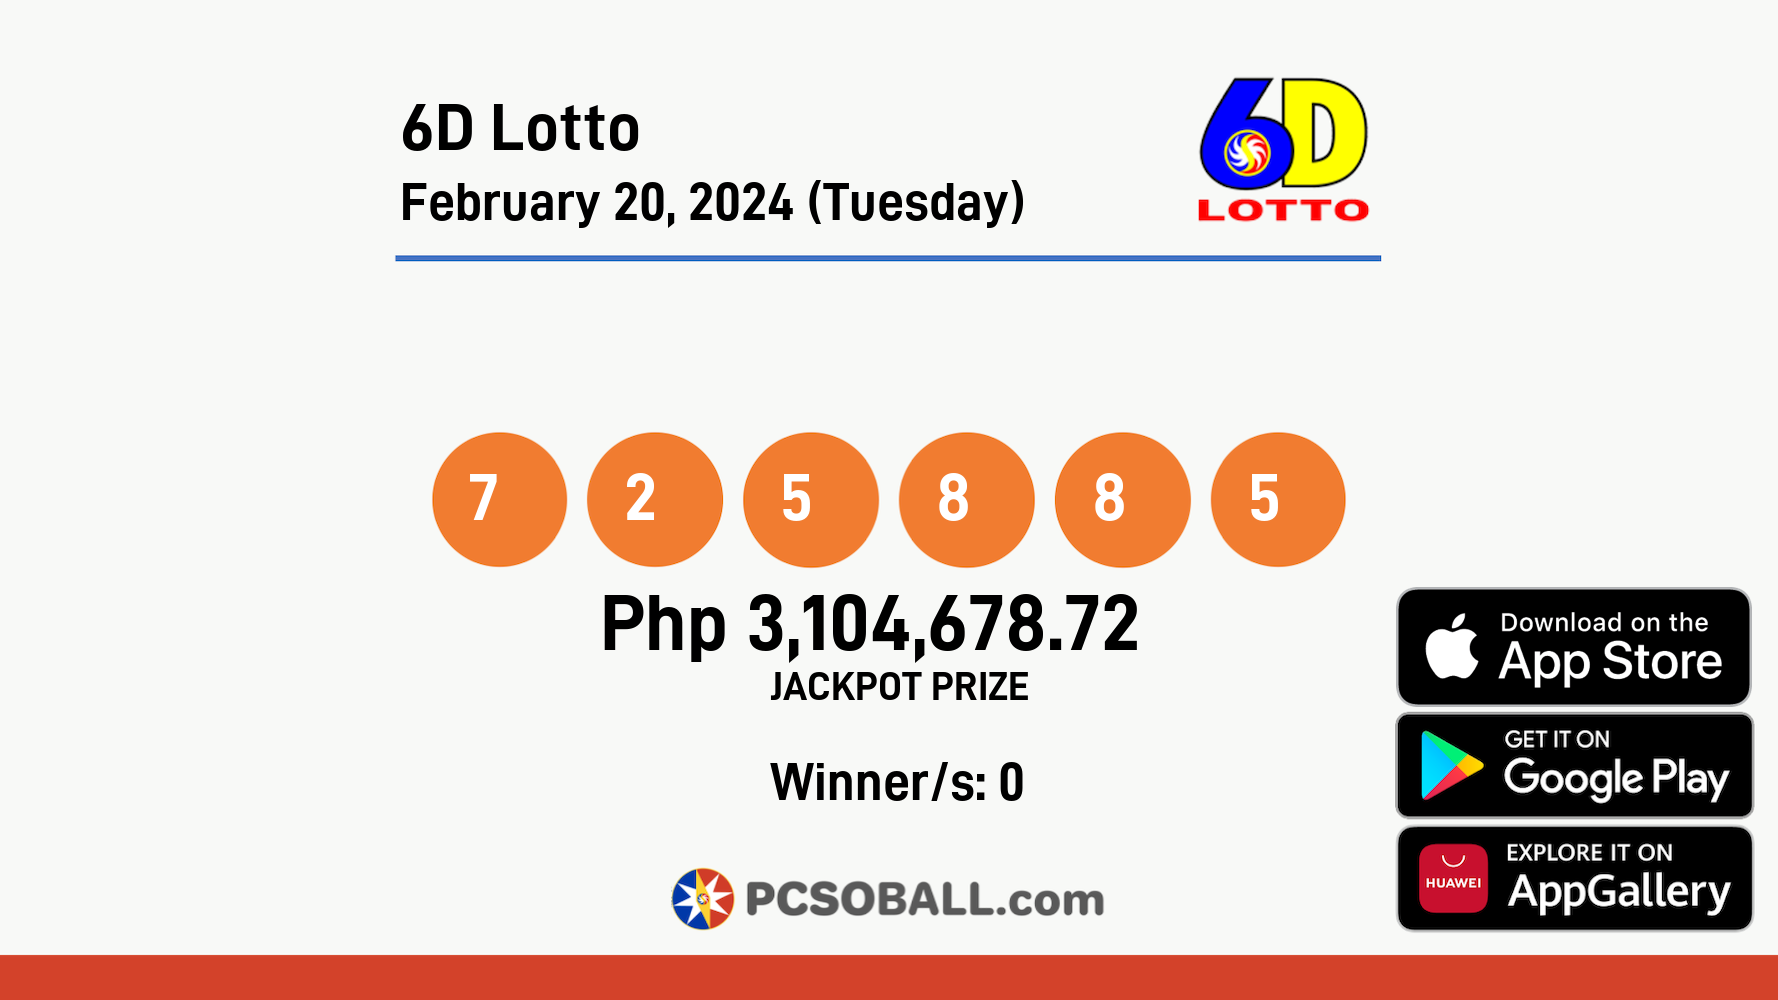 6D Lotto February 20, 2024 (Tuesday) Result